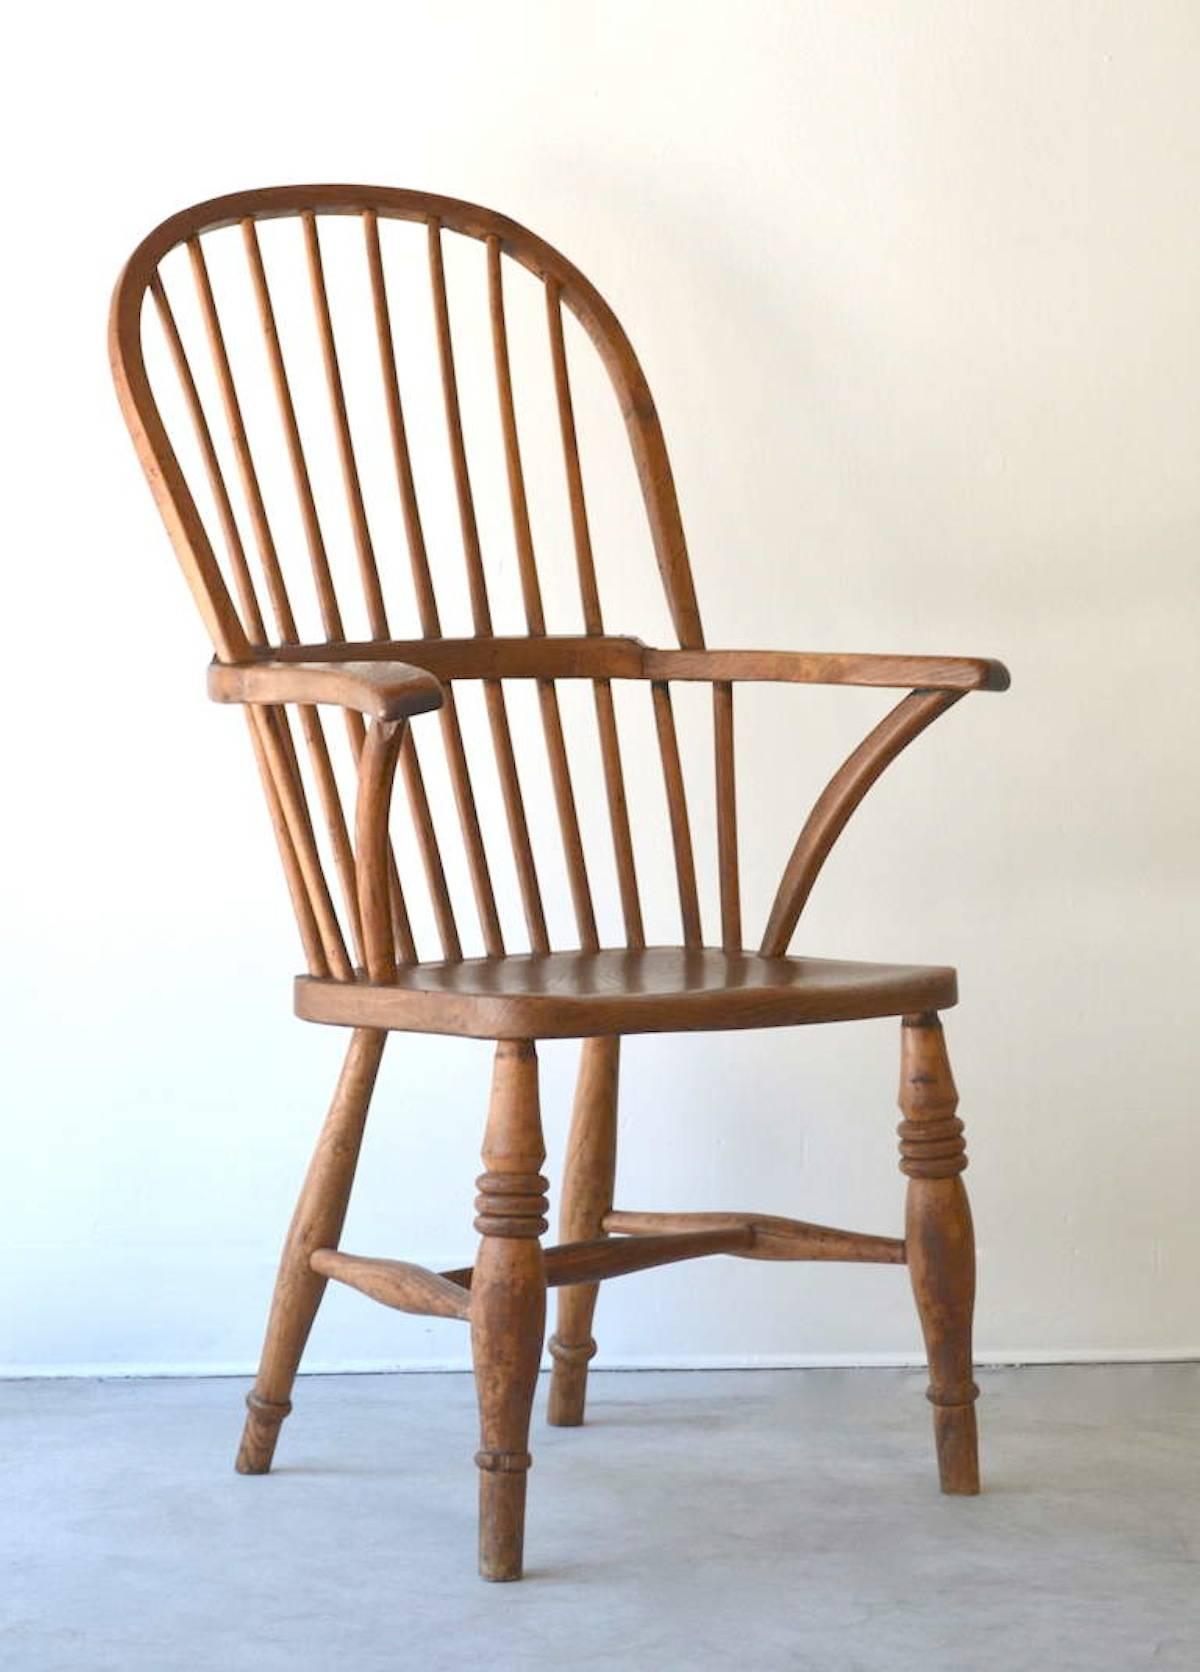 Bow-back broad armed windsor chair, circa 19th century. This sculptural hardwood side chair or desk chair maintains its wonderful aged patina.